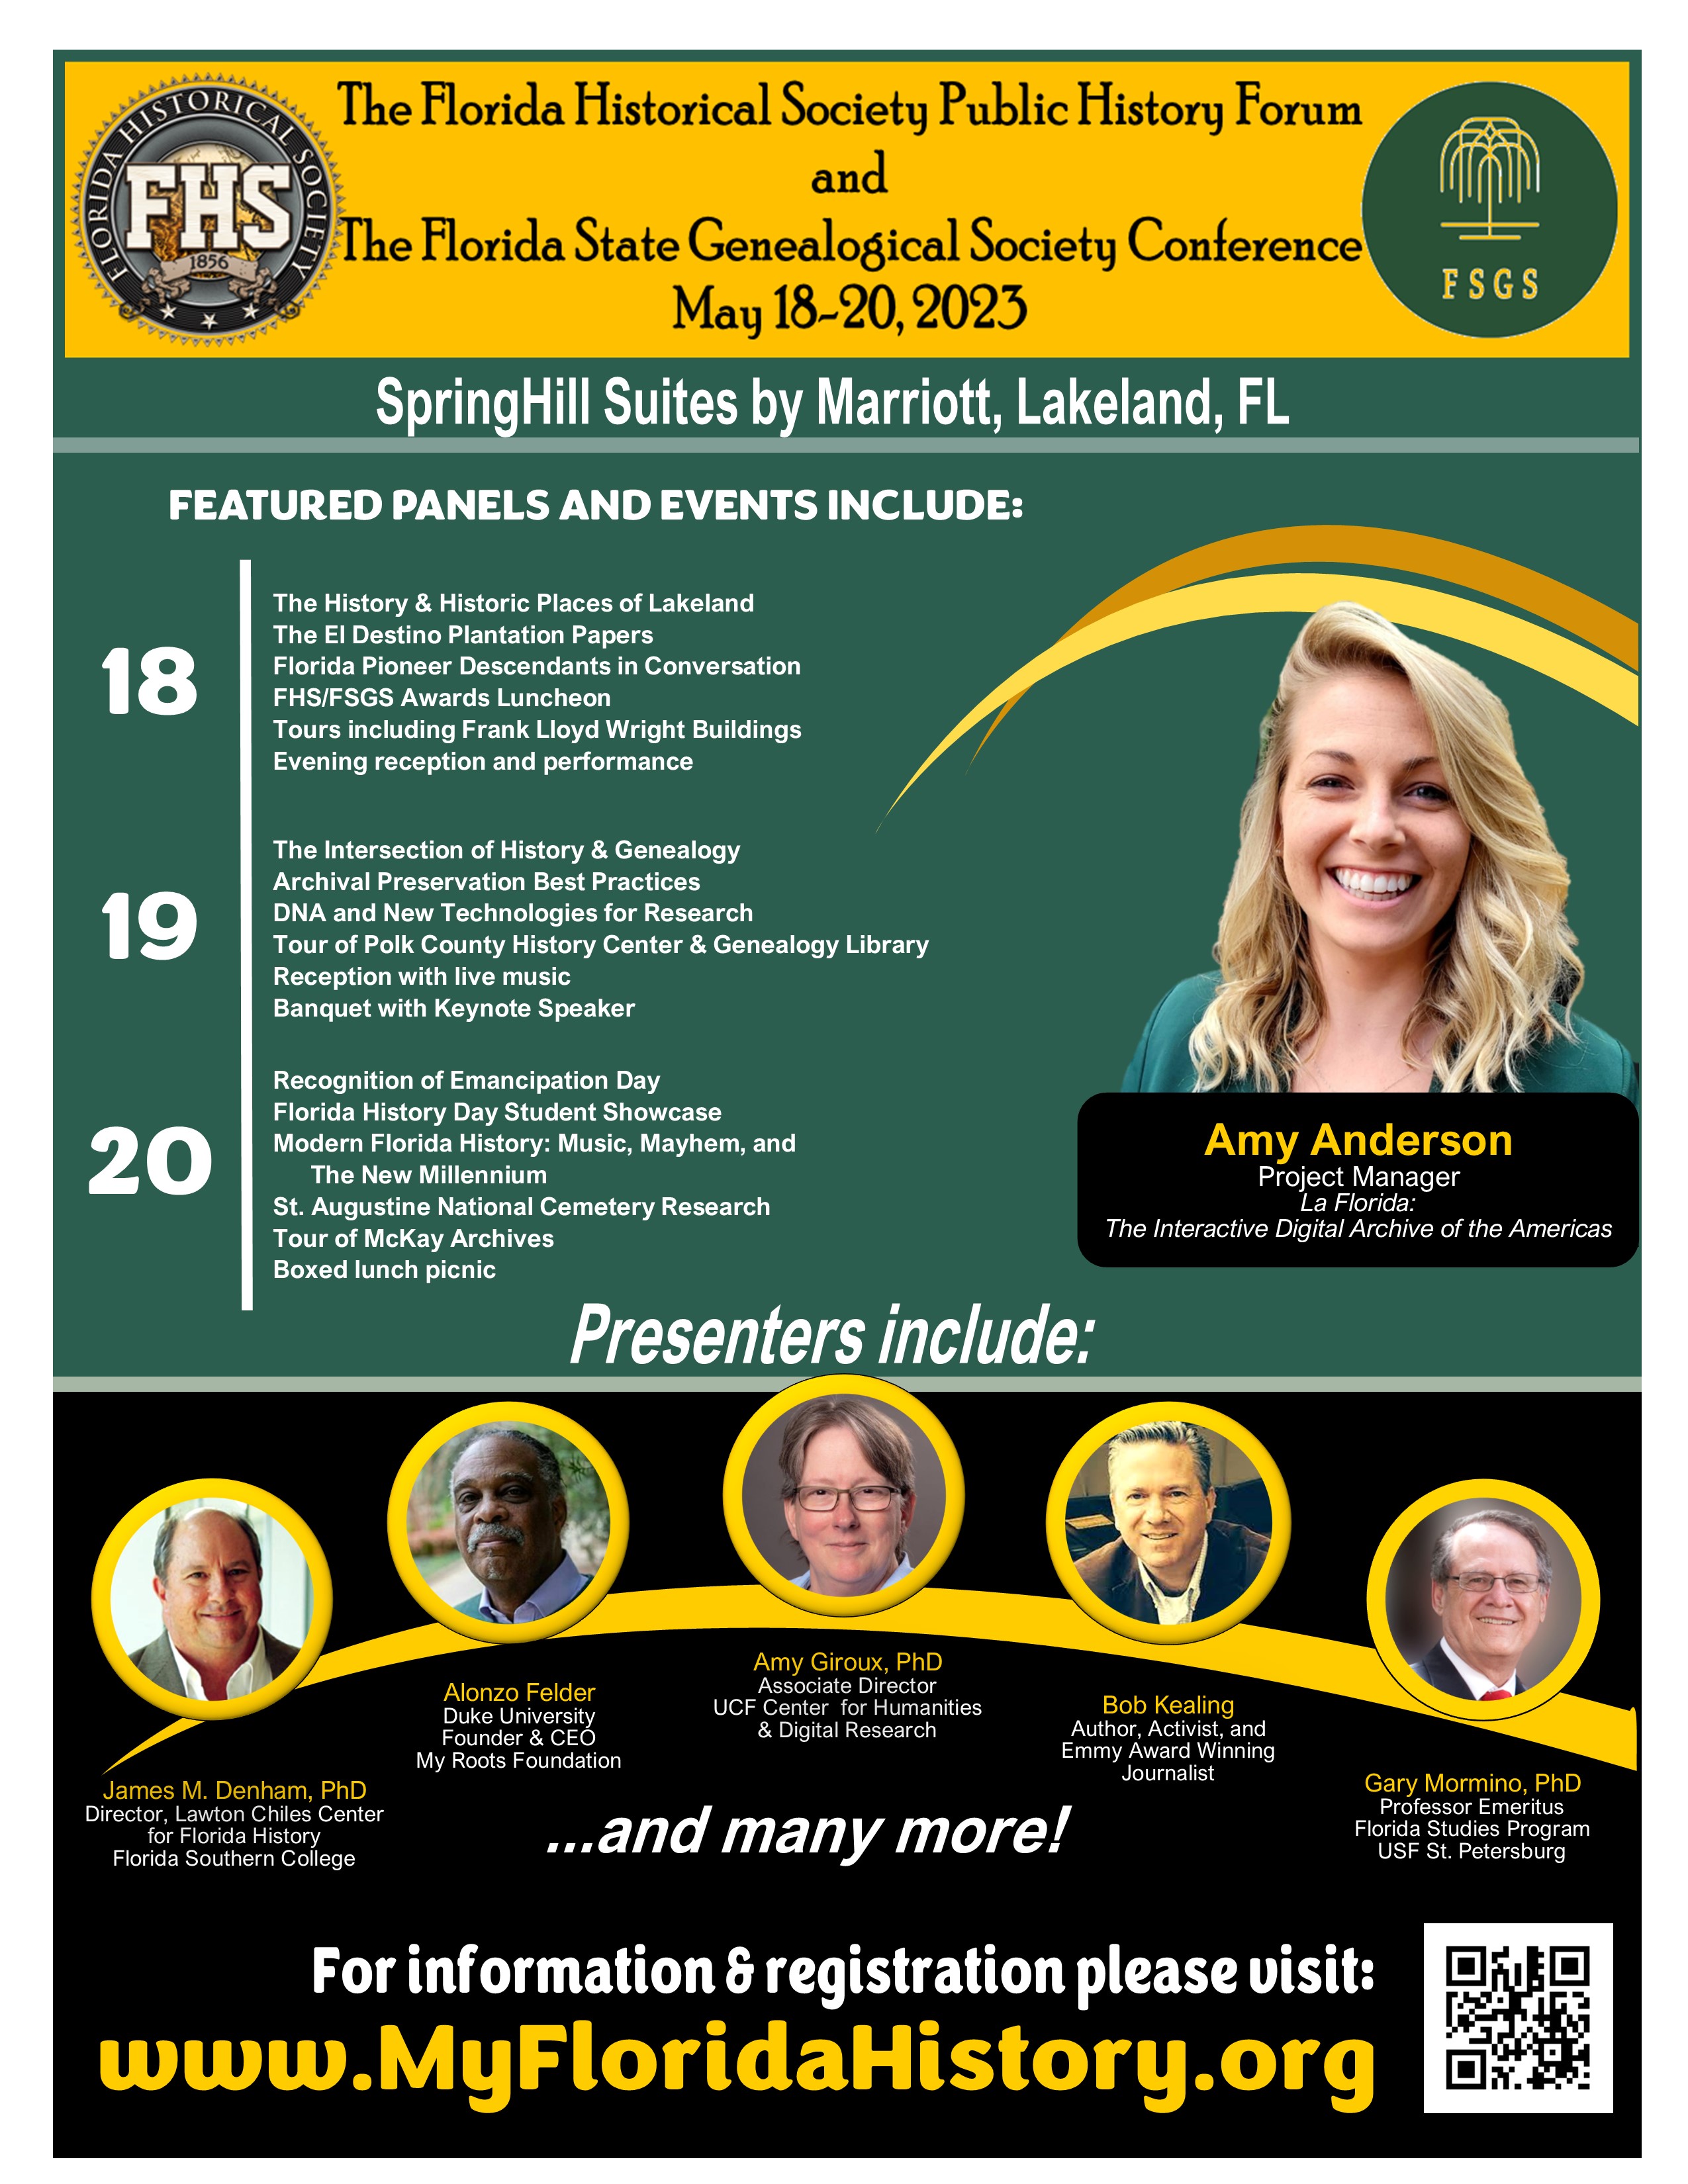 Florida Historical Society Public History Forum and The Florida State Genealogical Society Conference